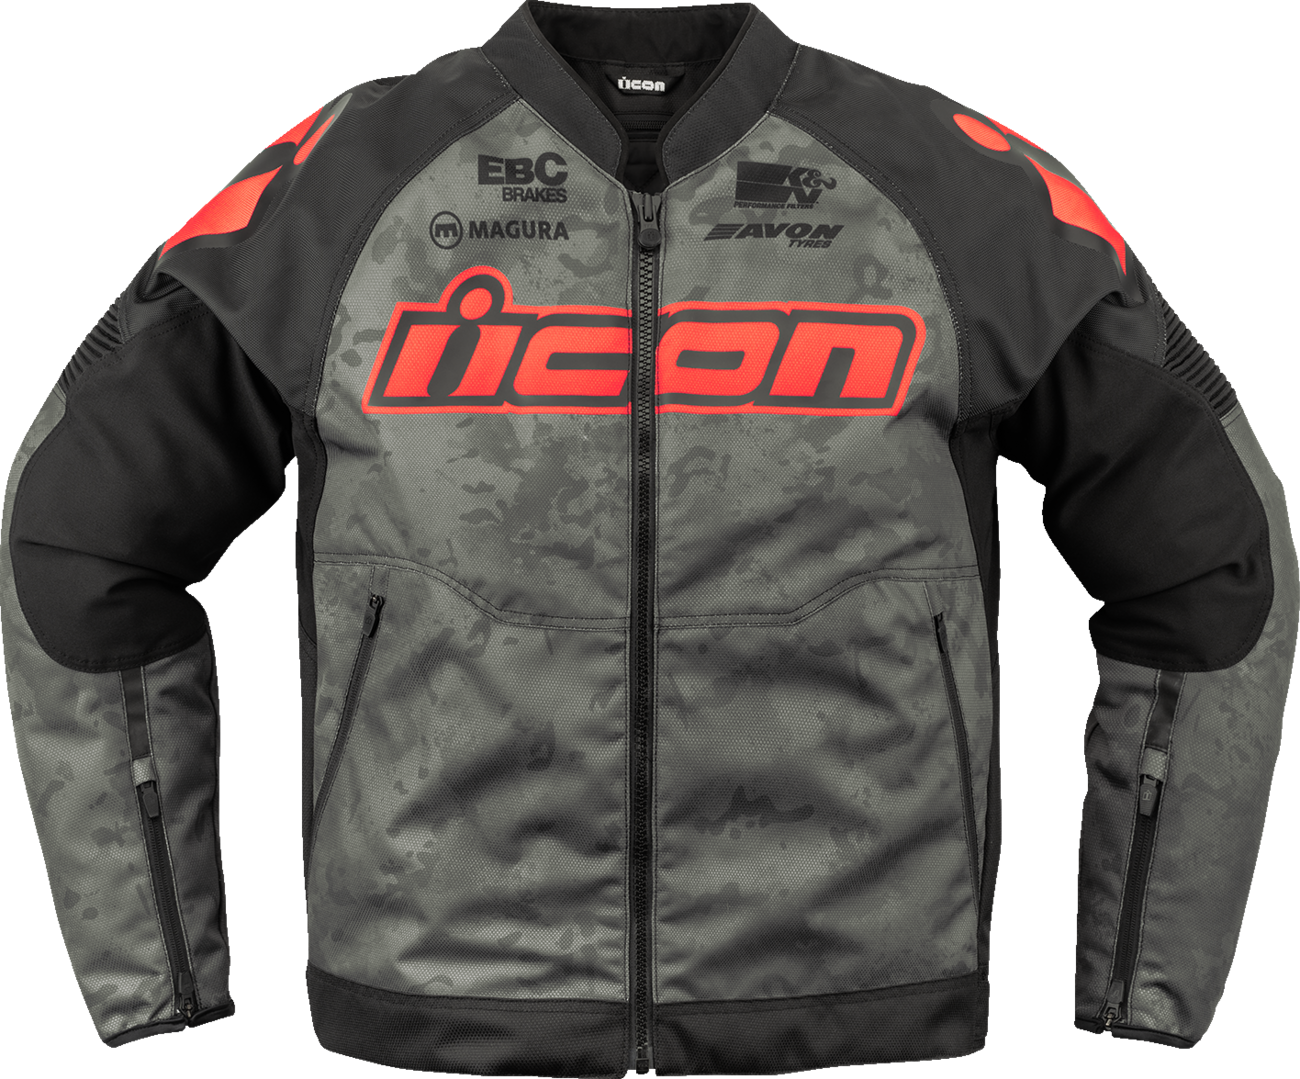 ICON Overlord3™ CE Magnacross Jacket - Gray - XL 2820-6715